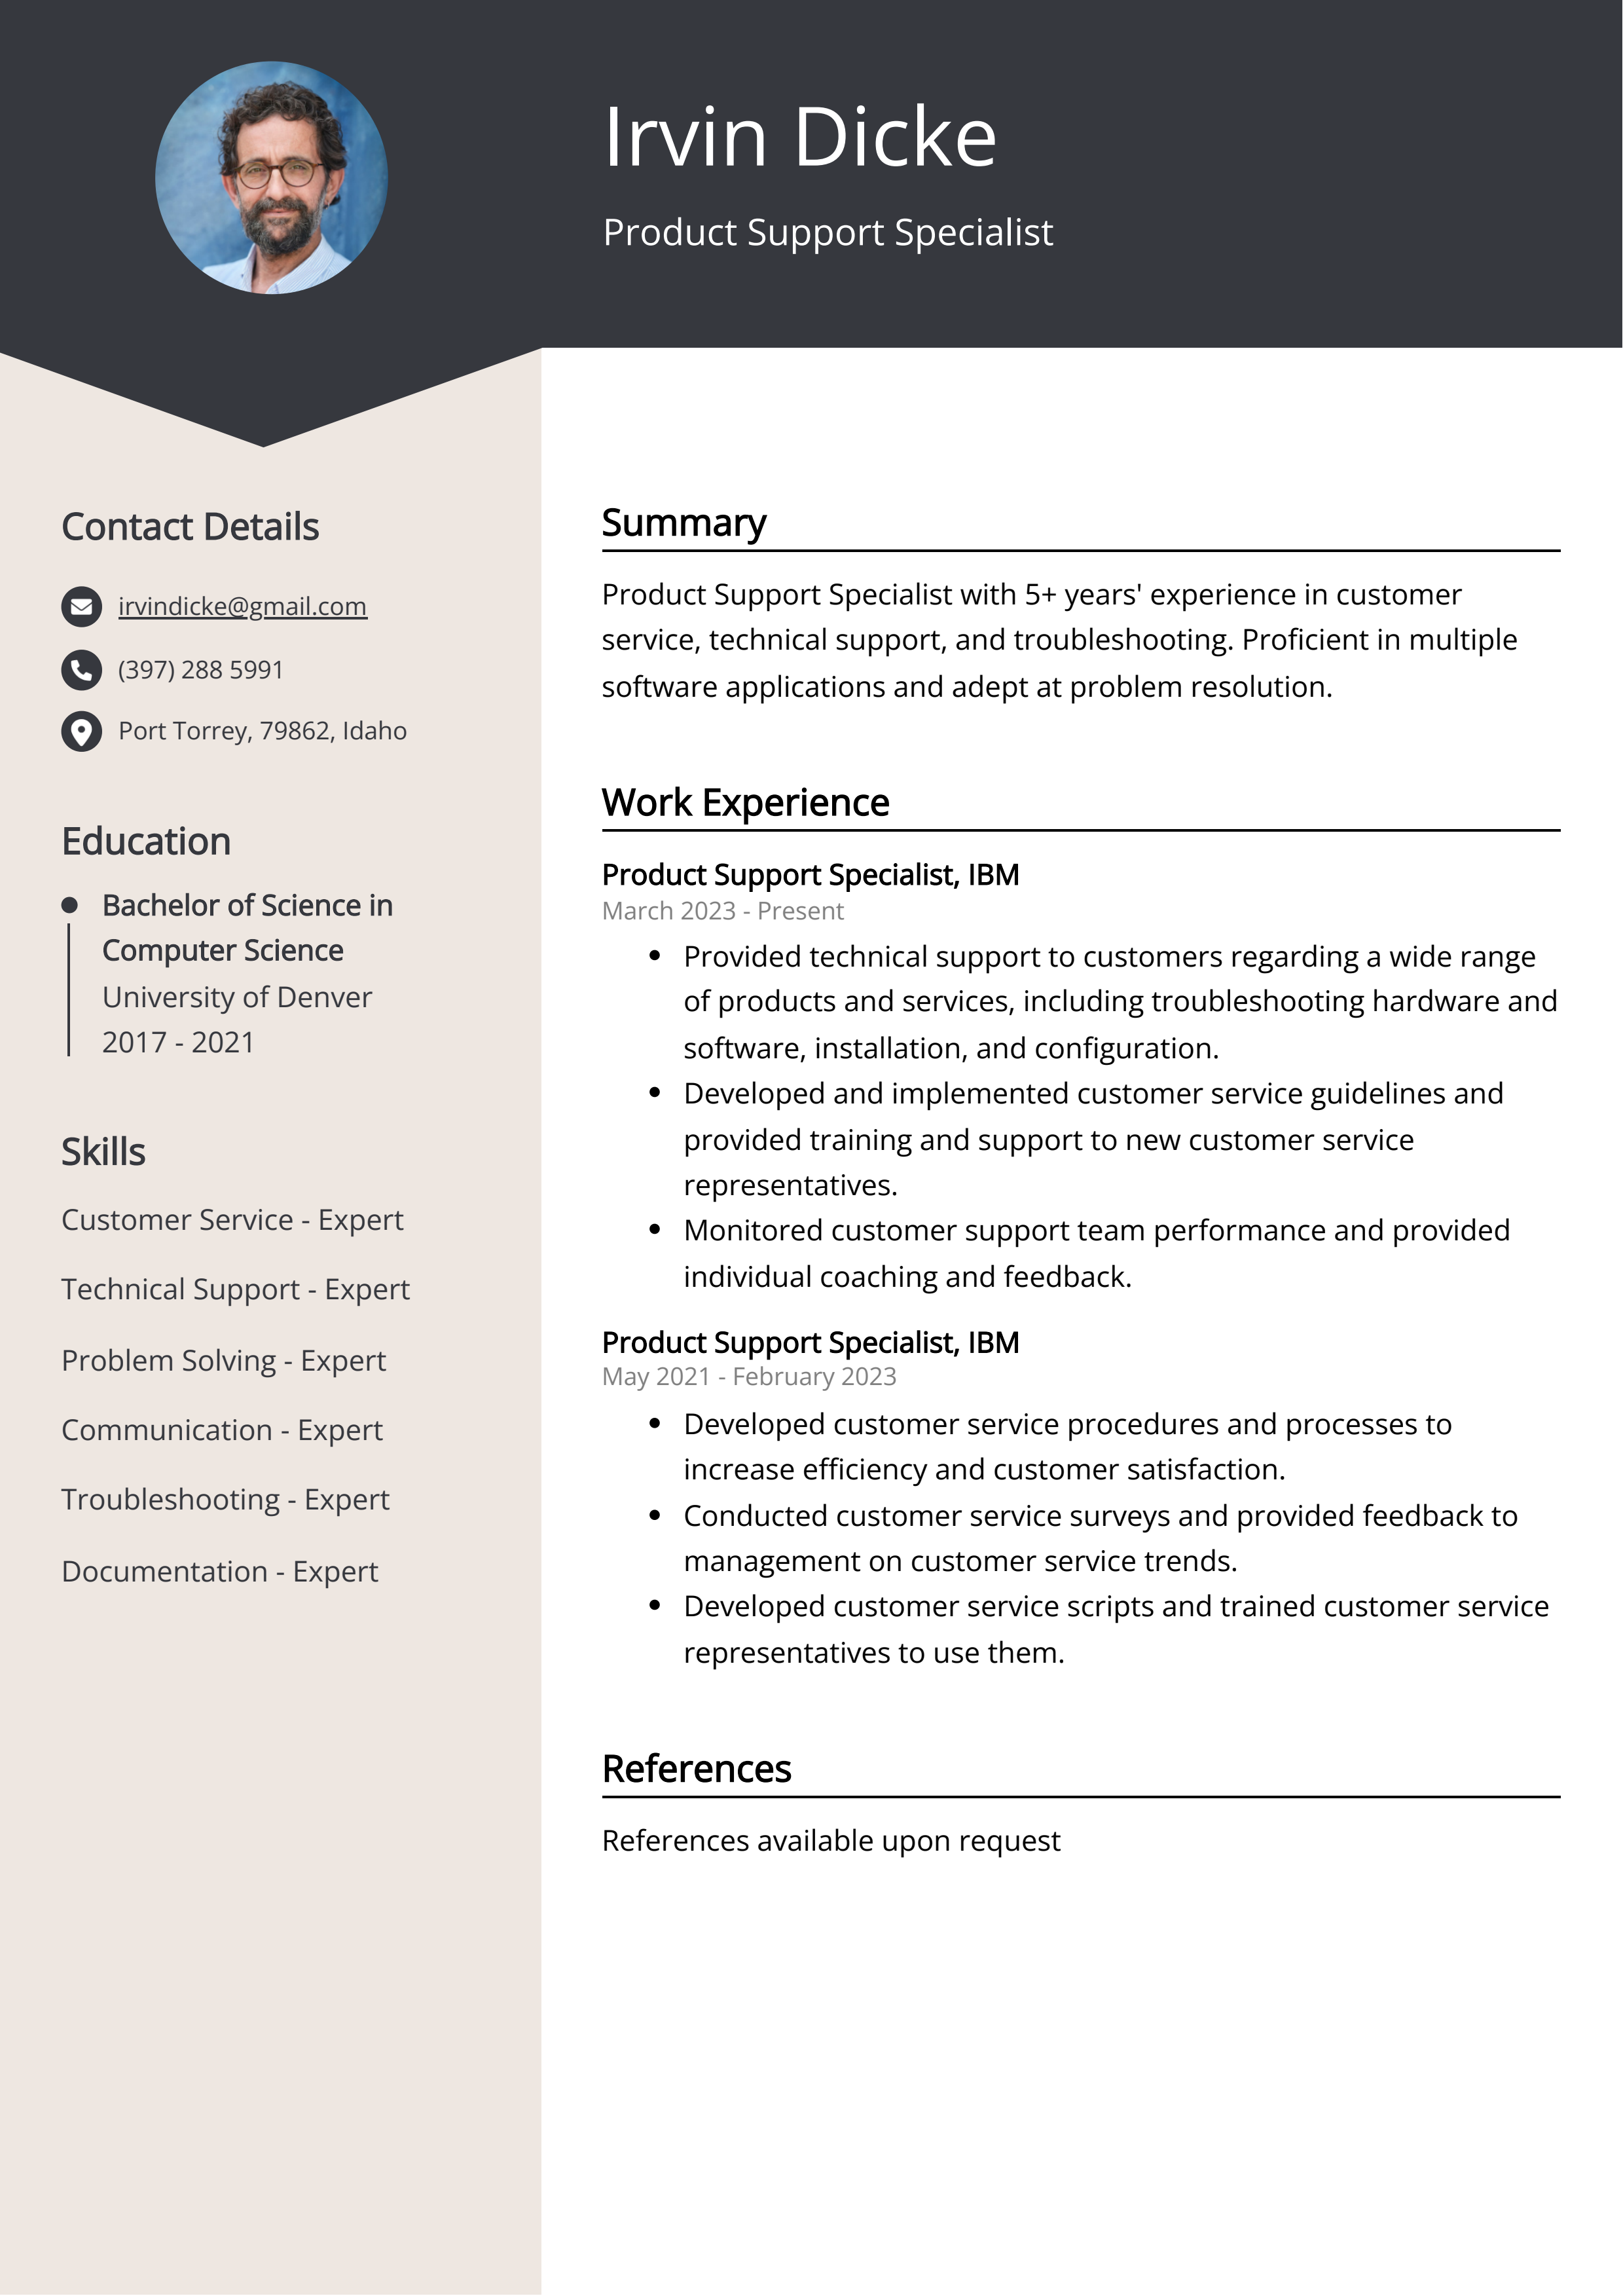 Product Support Specialist Resume Example